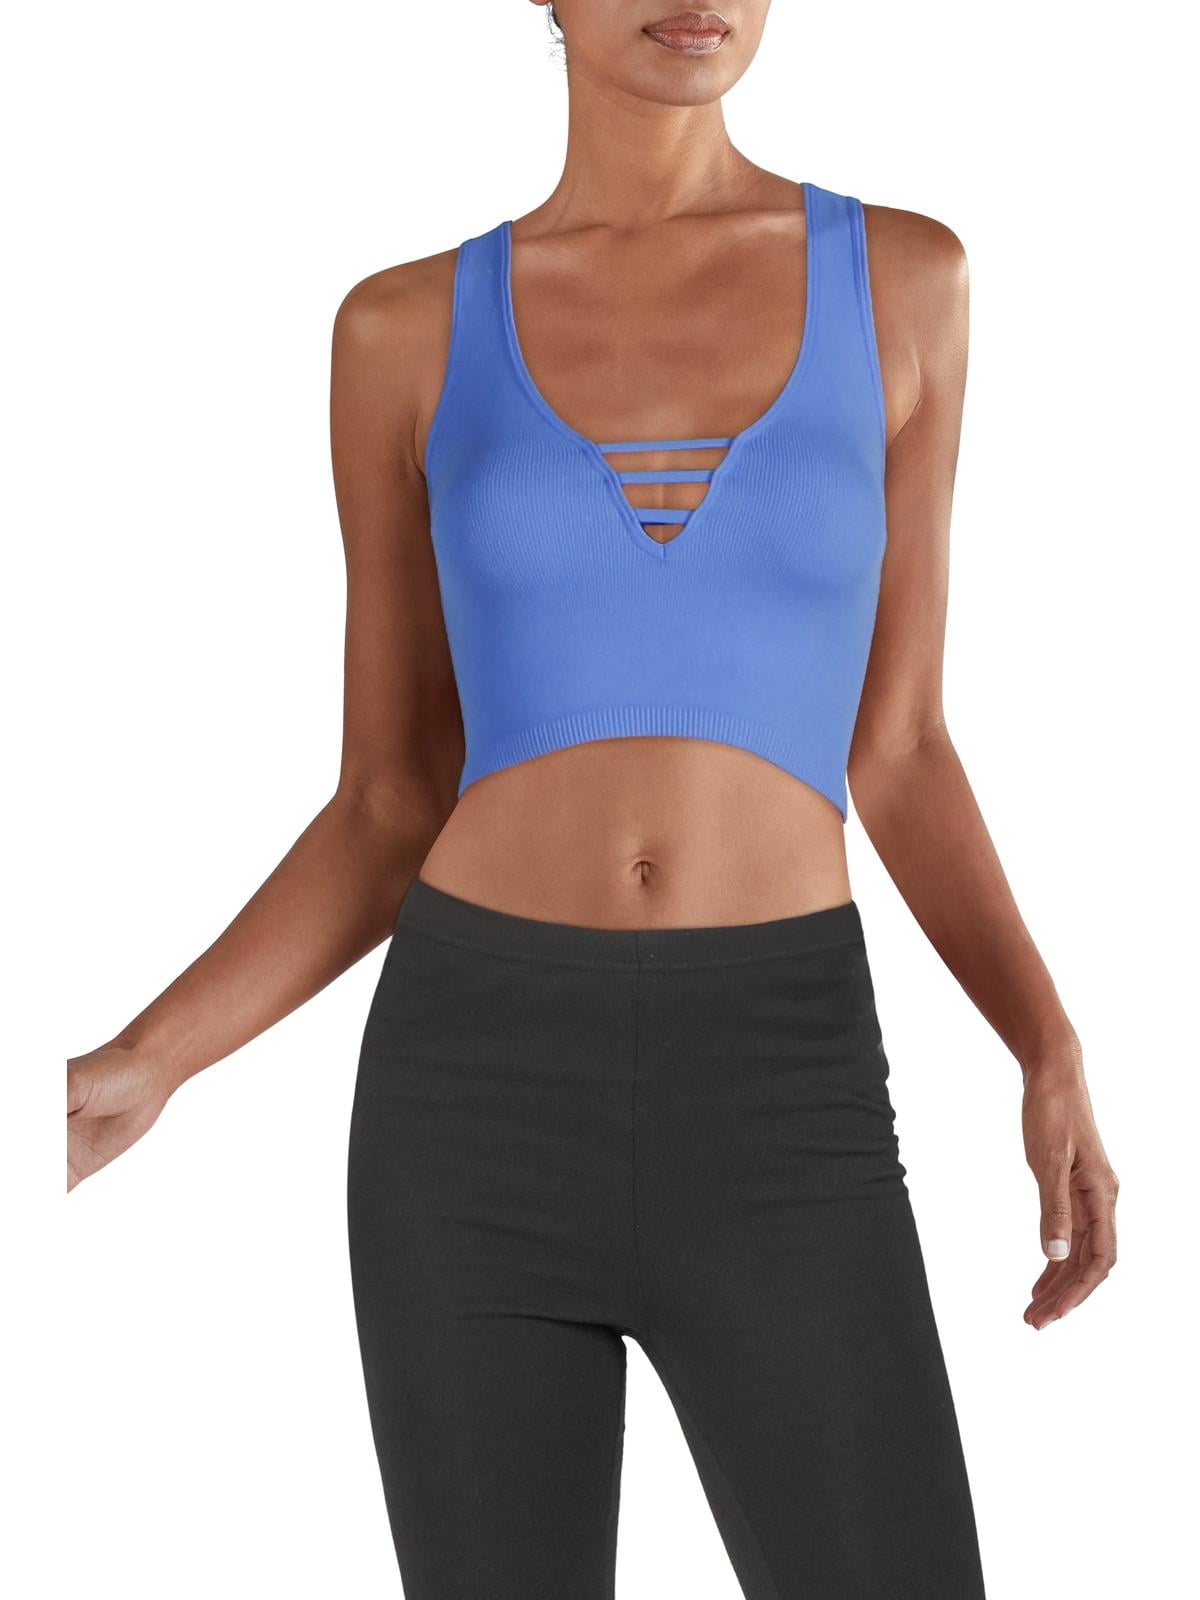 Intimately Free People Womens Fitness Workout Crop Top Blue M/L 